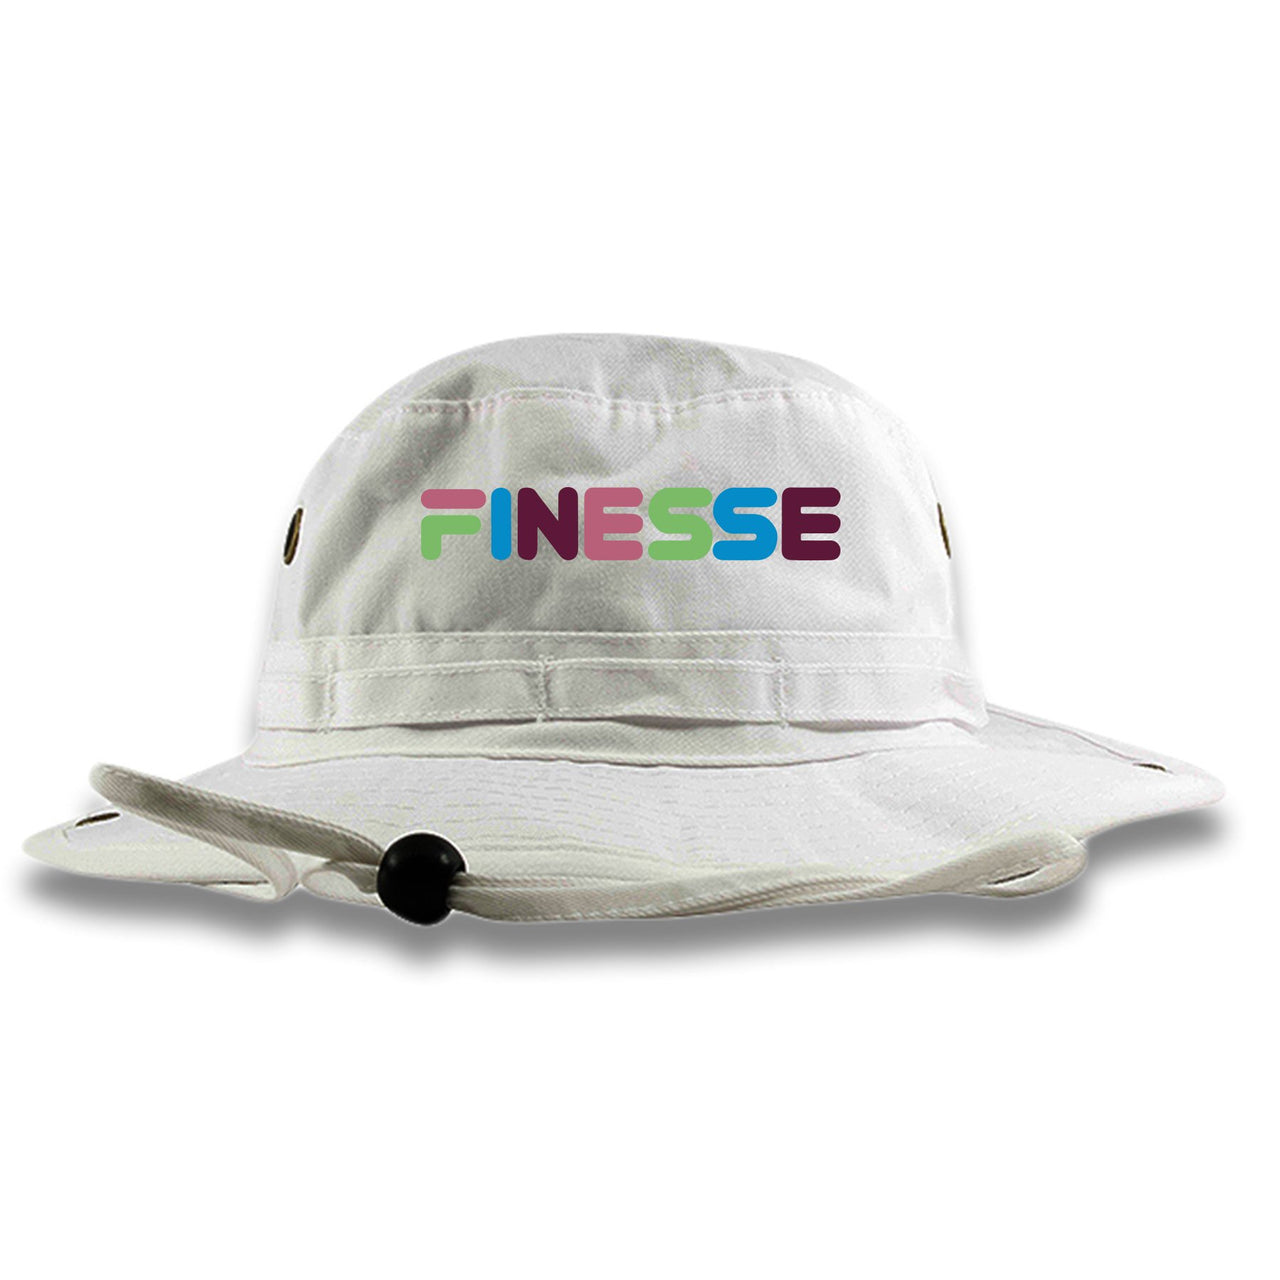 Multi Color Hyper Pink 720s Bucket Hat | Finesse, White